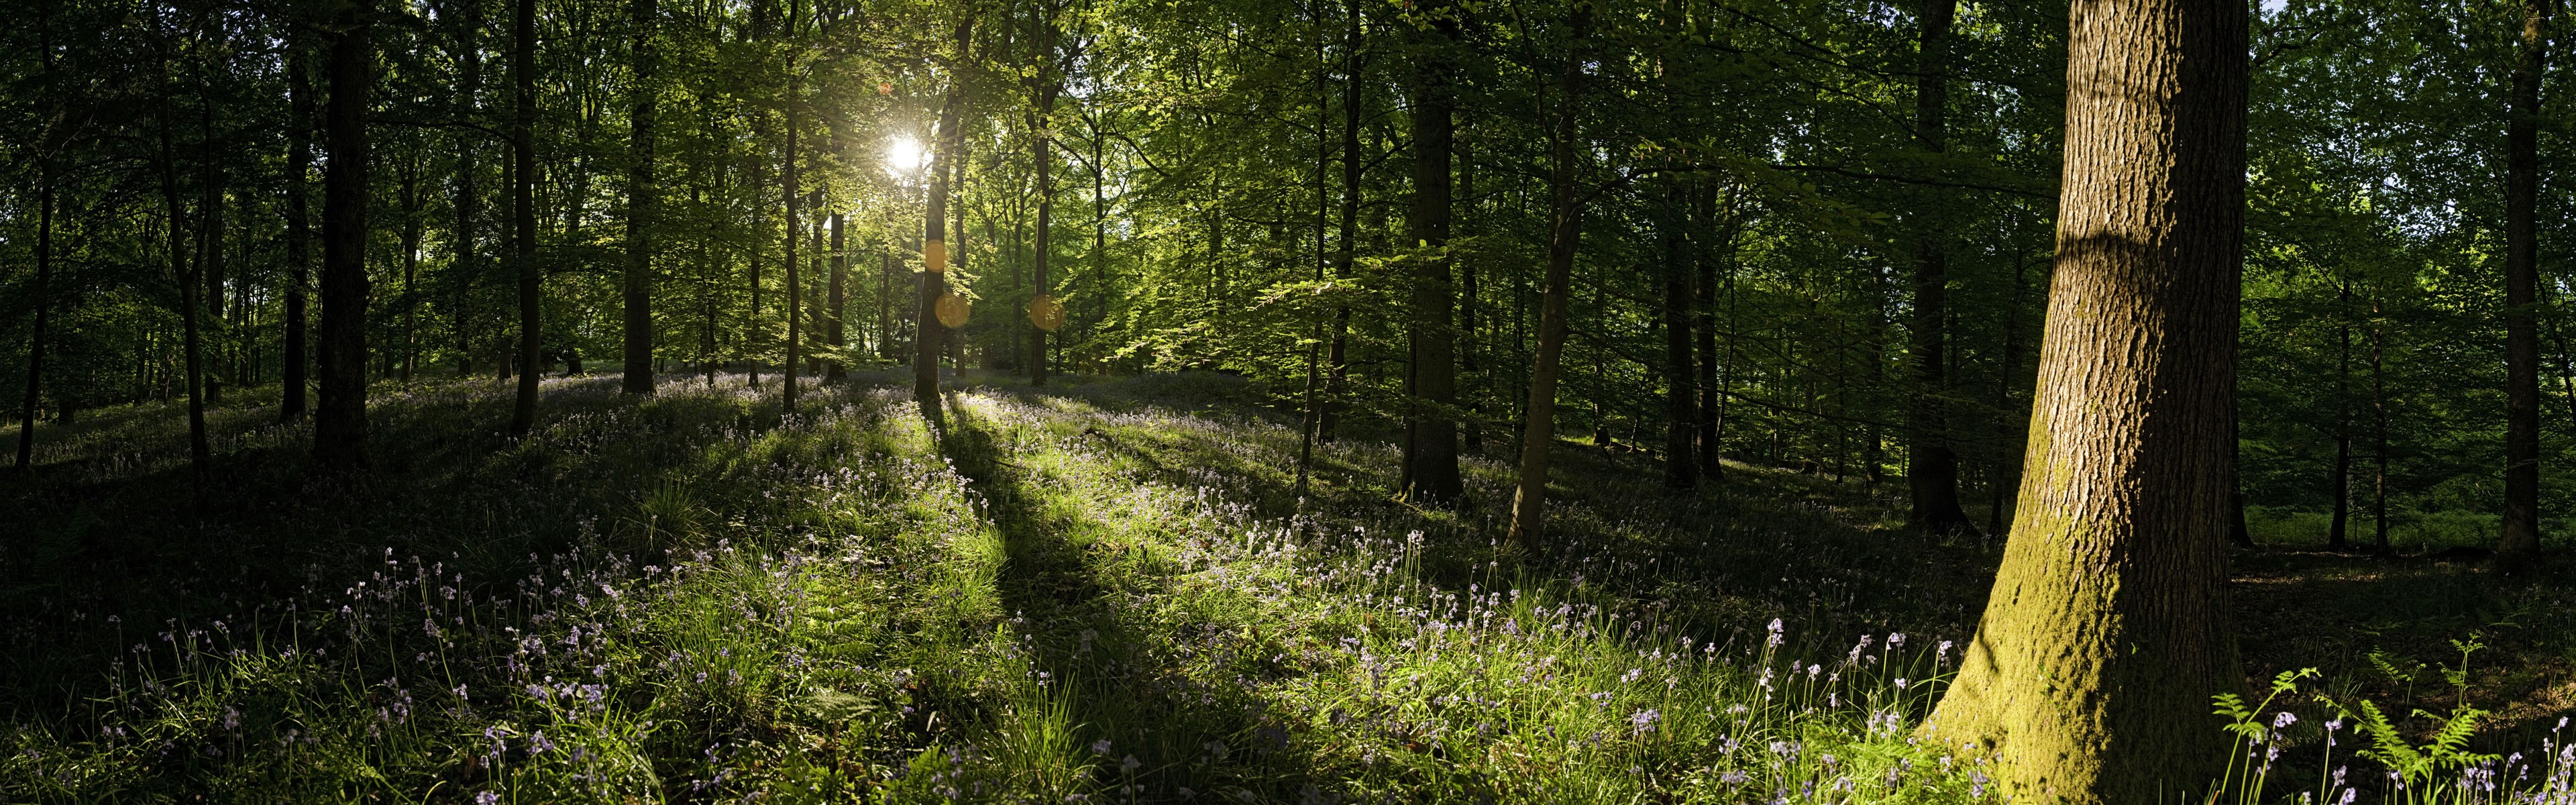 Trees Forest Sunlight Panorama Wildflowers Wallpaper